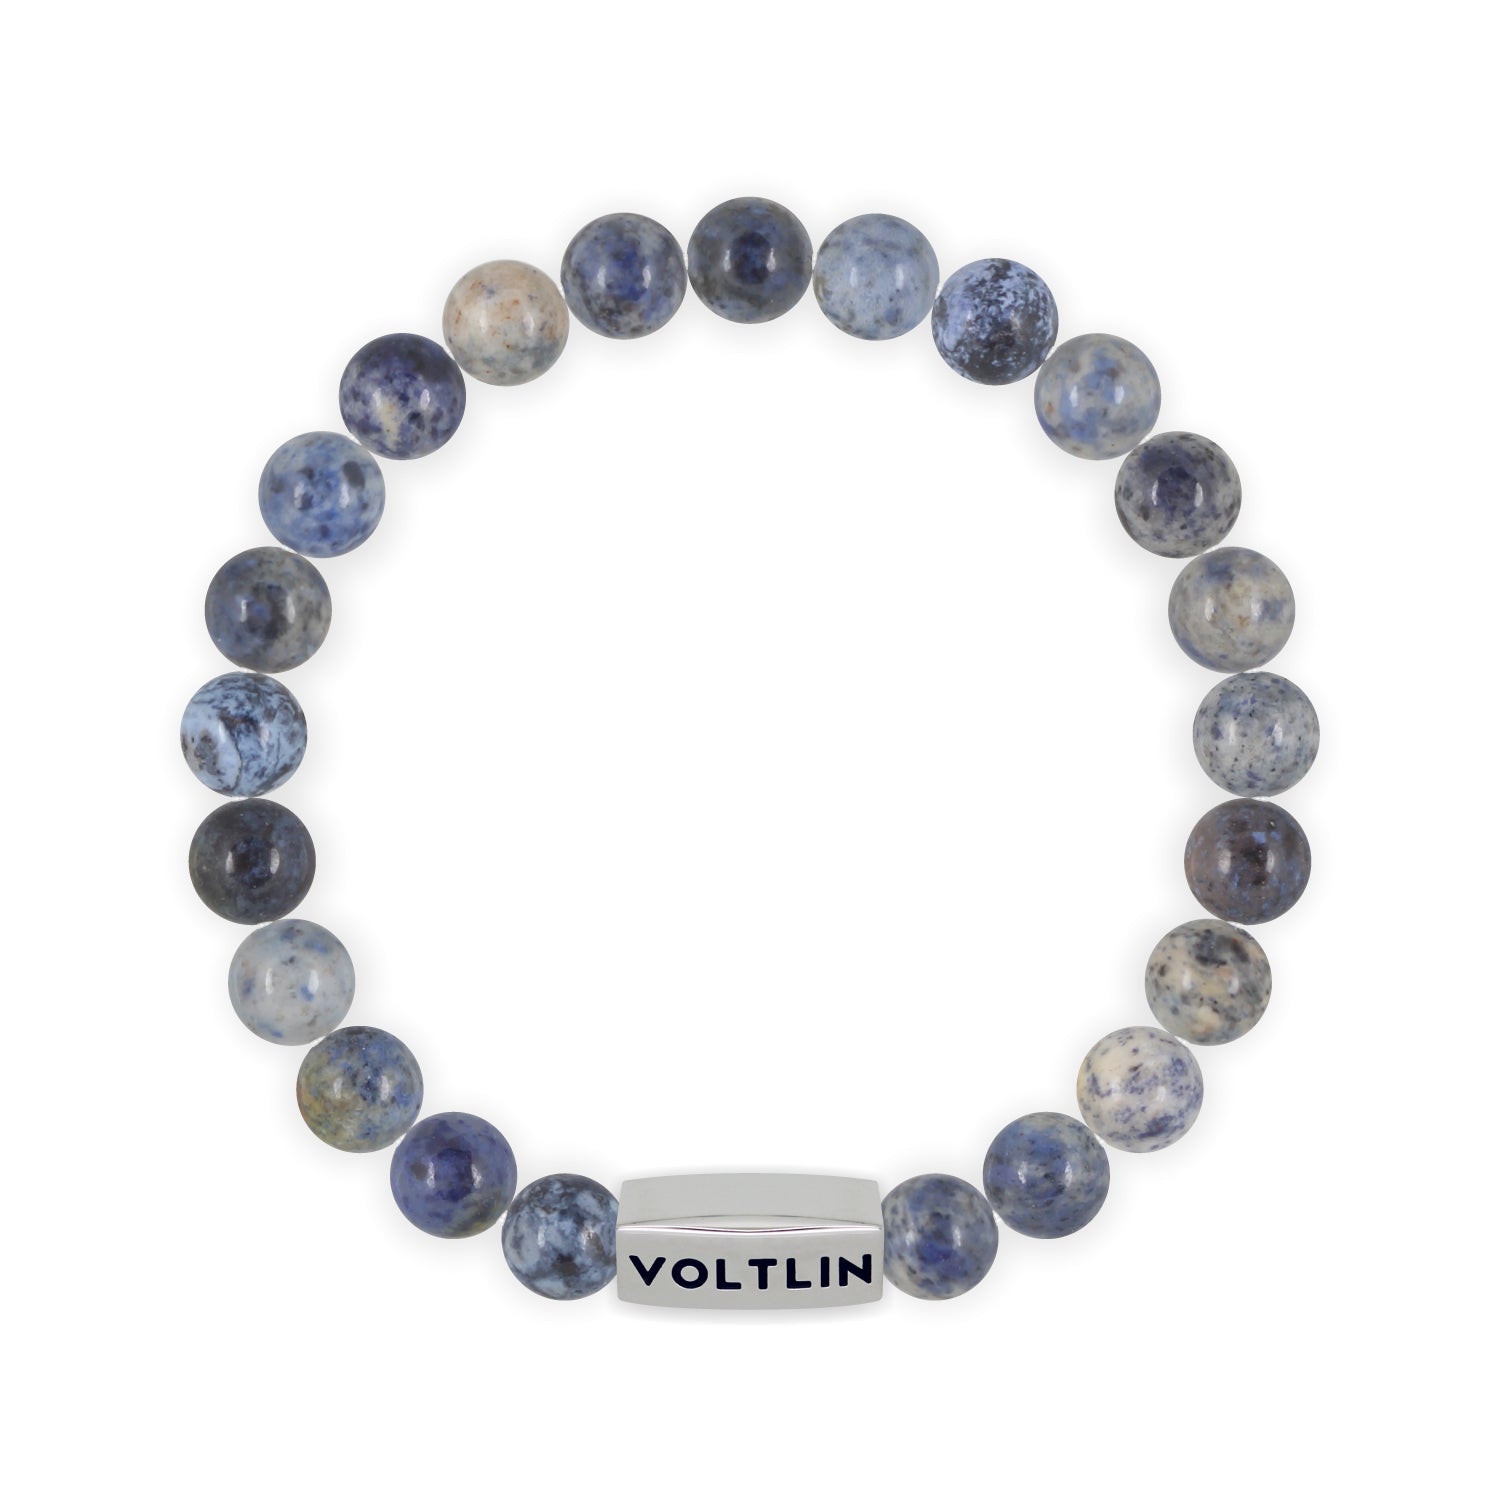 Front view of an 8mm Dumortierite beaded stretch bracelet with silver stainless steel logo bead made by Voltlin